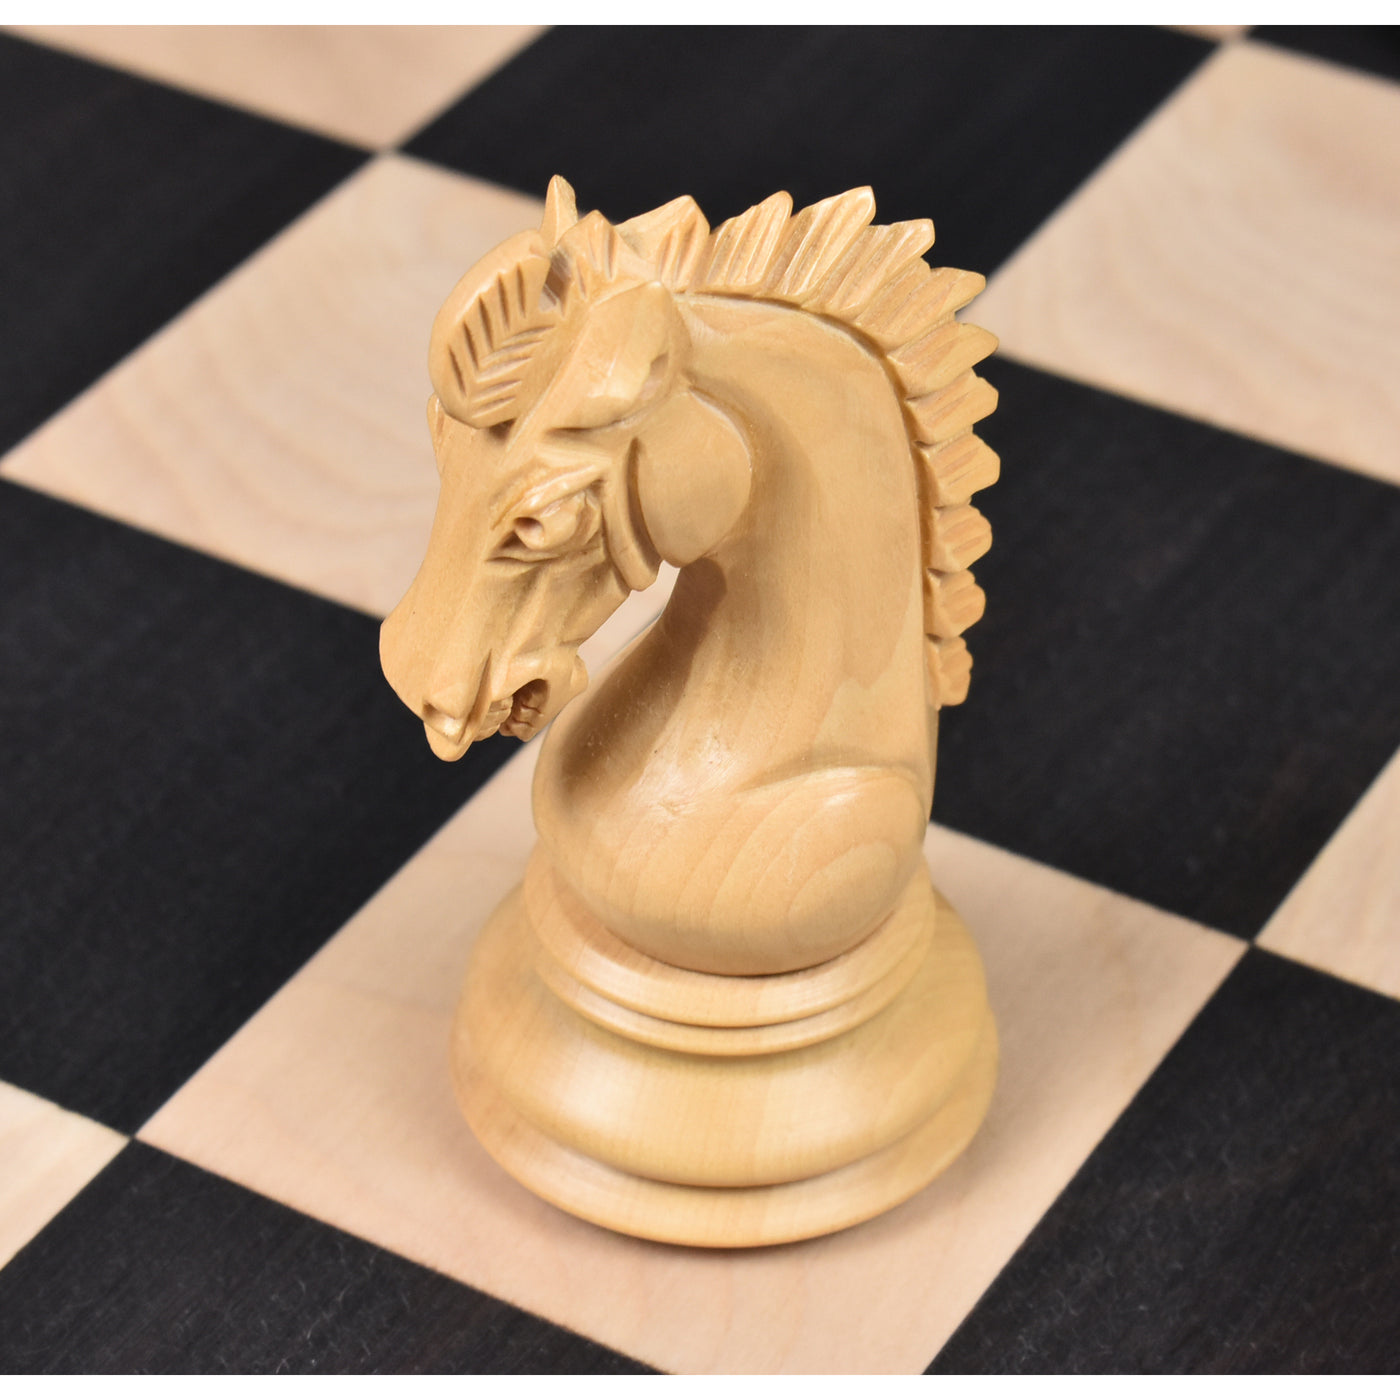 Slightly Imperfect 3.7" Emperor Series Staunton Chess Pieces Only set- Double Weighted Ebony Wood